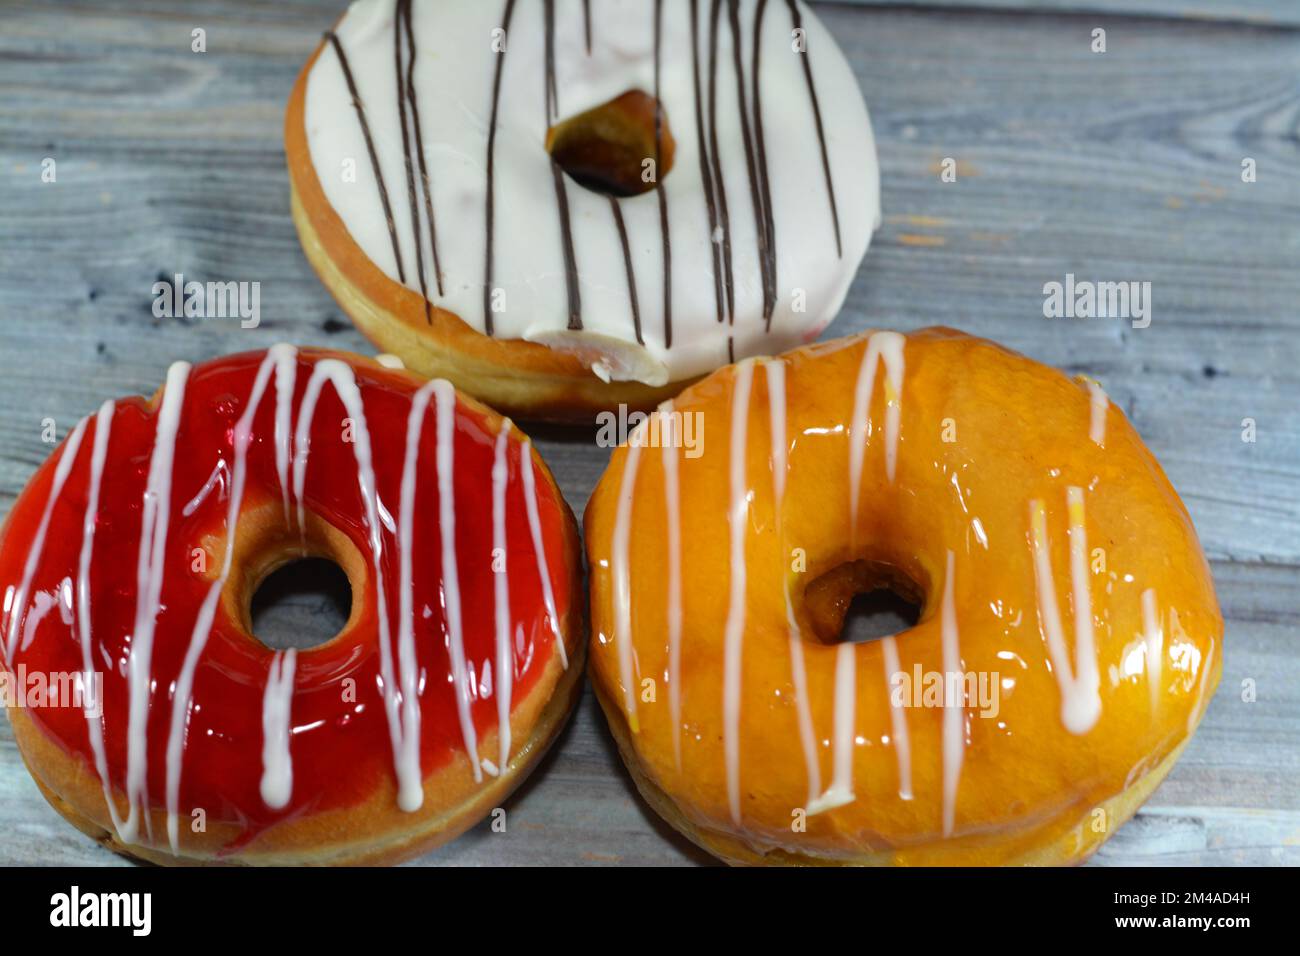 Ring donuts with white chocolate, strawberry and mango layer flavors with white chocolate sauce, A glazed, yeast raised, American style ring doughnuts Stock Photo